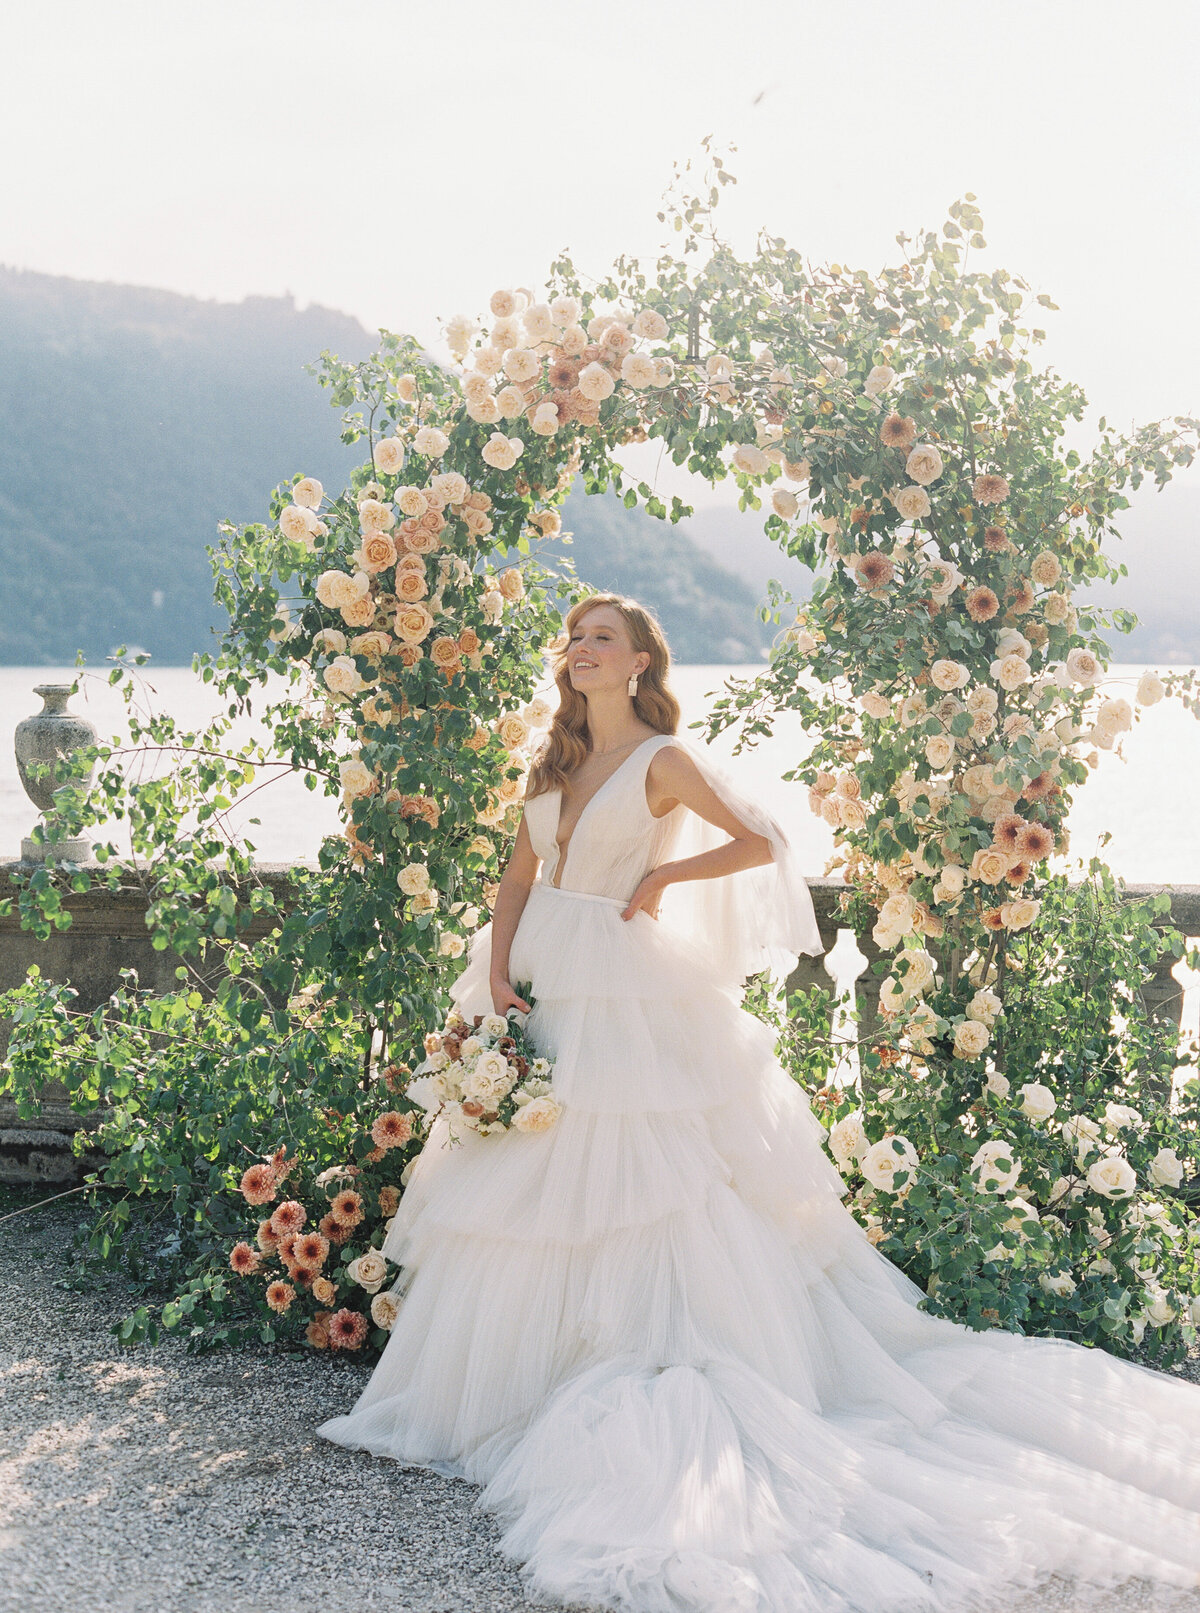 Liz Andolina Photography Destination Wedding Photographer in Italy, New York, Across the East Coast Editorial, heritage-quality images for stylish couples Villa Pizzo Editorial-Liz Andolina Photography-259